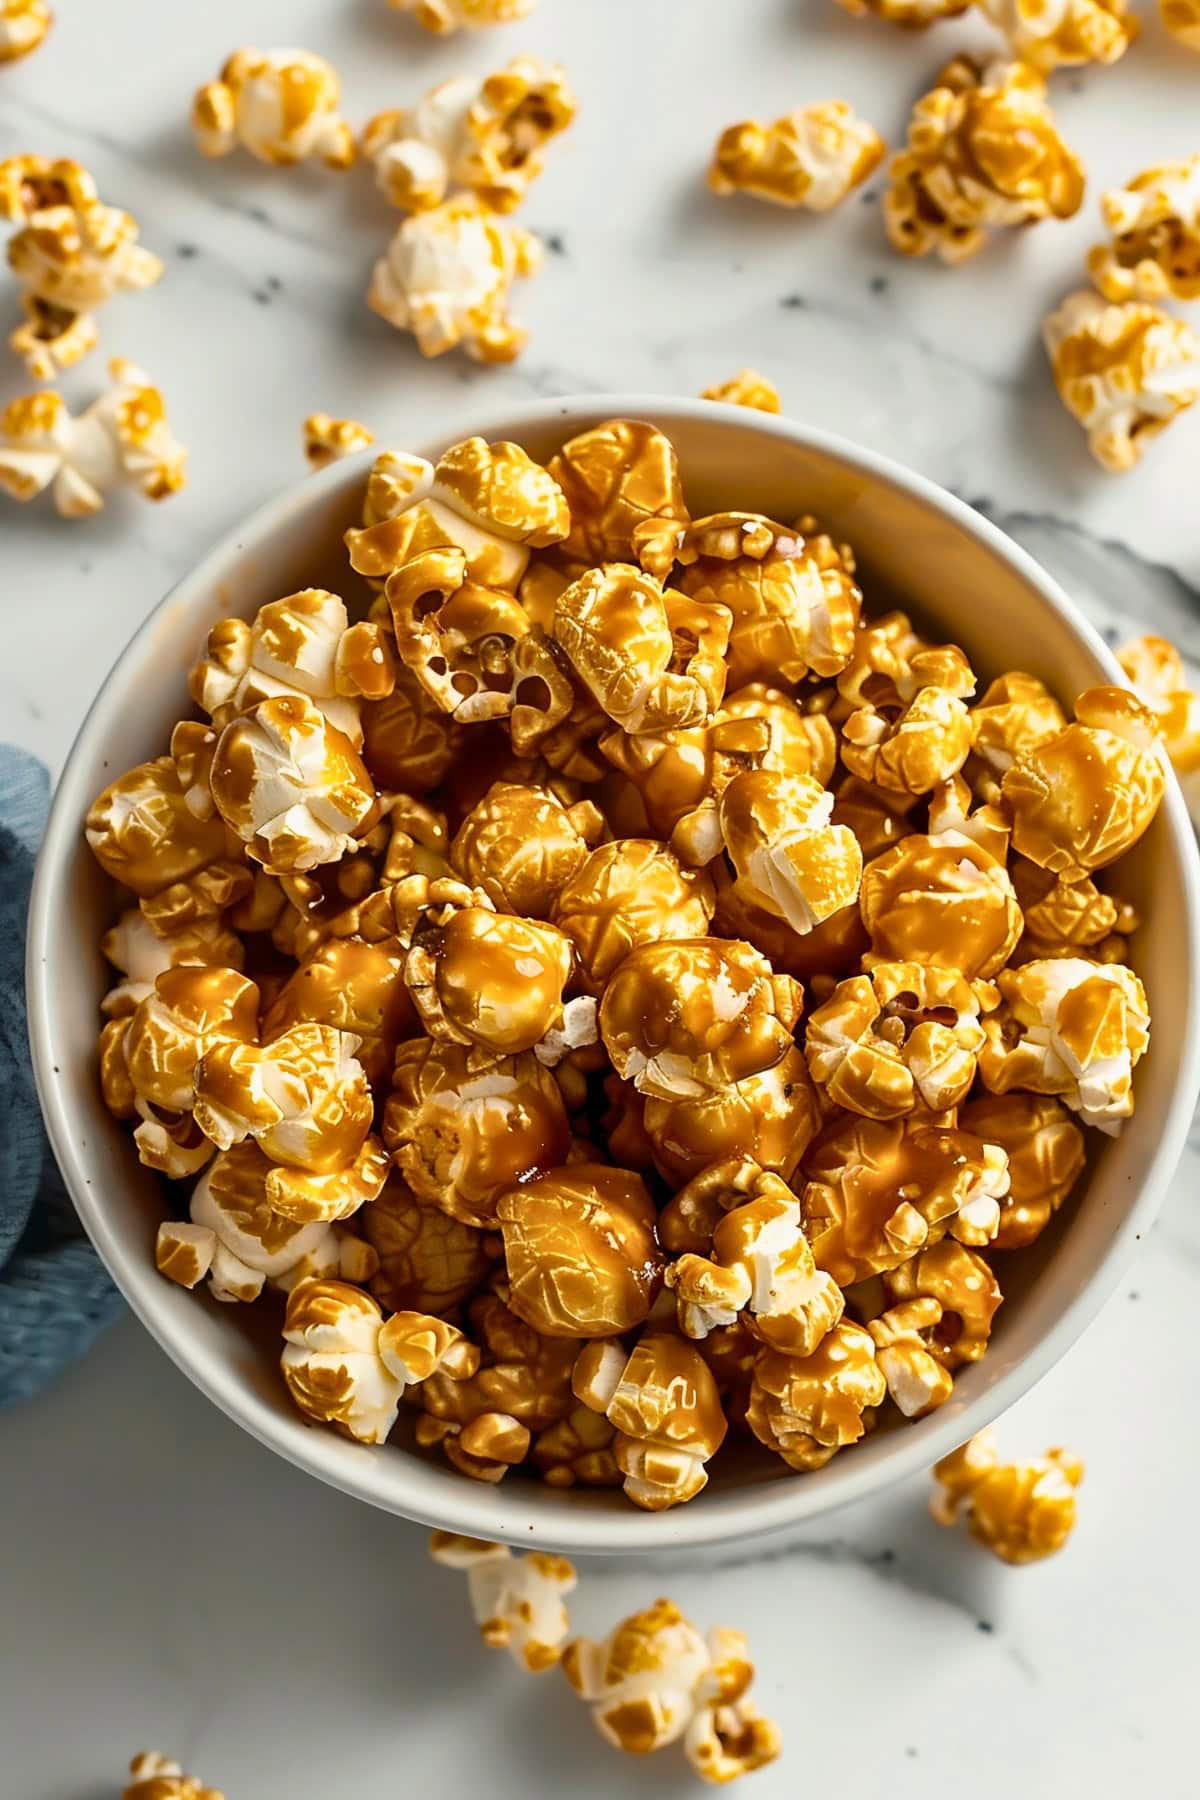 Top View Microwave Caramel Popcorn in a Bowl on a White Marble Table with a Kitchen Towel